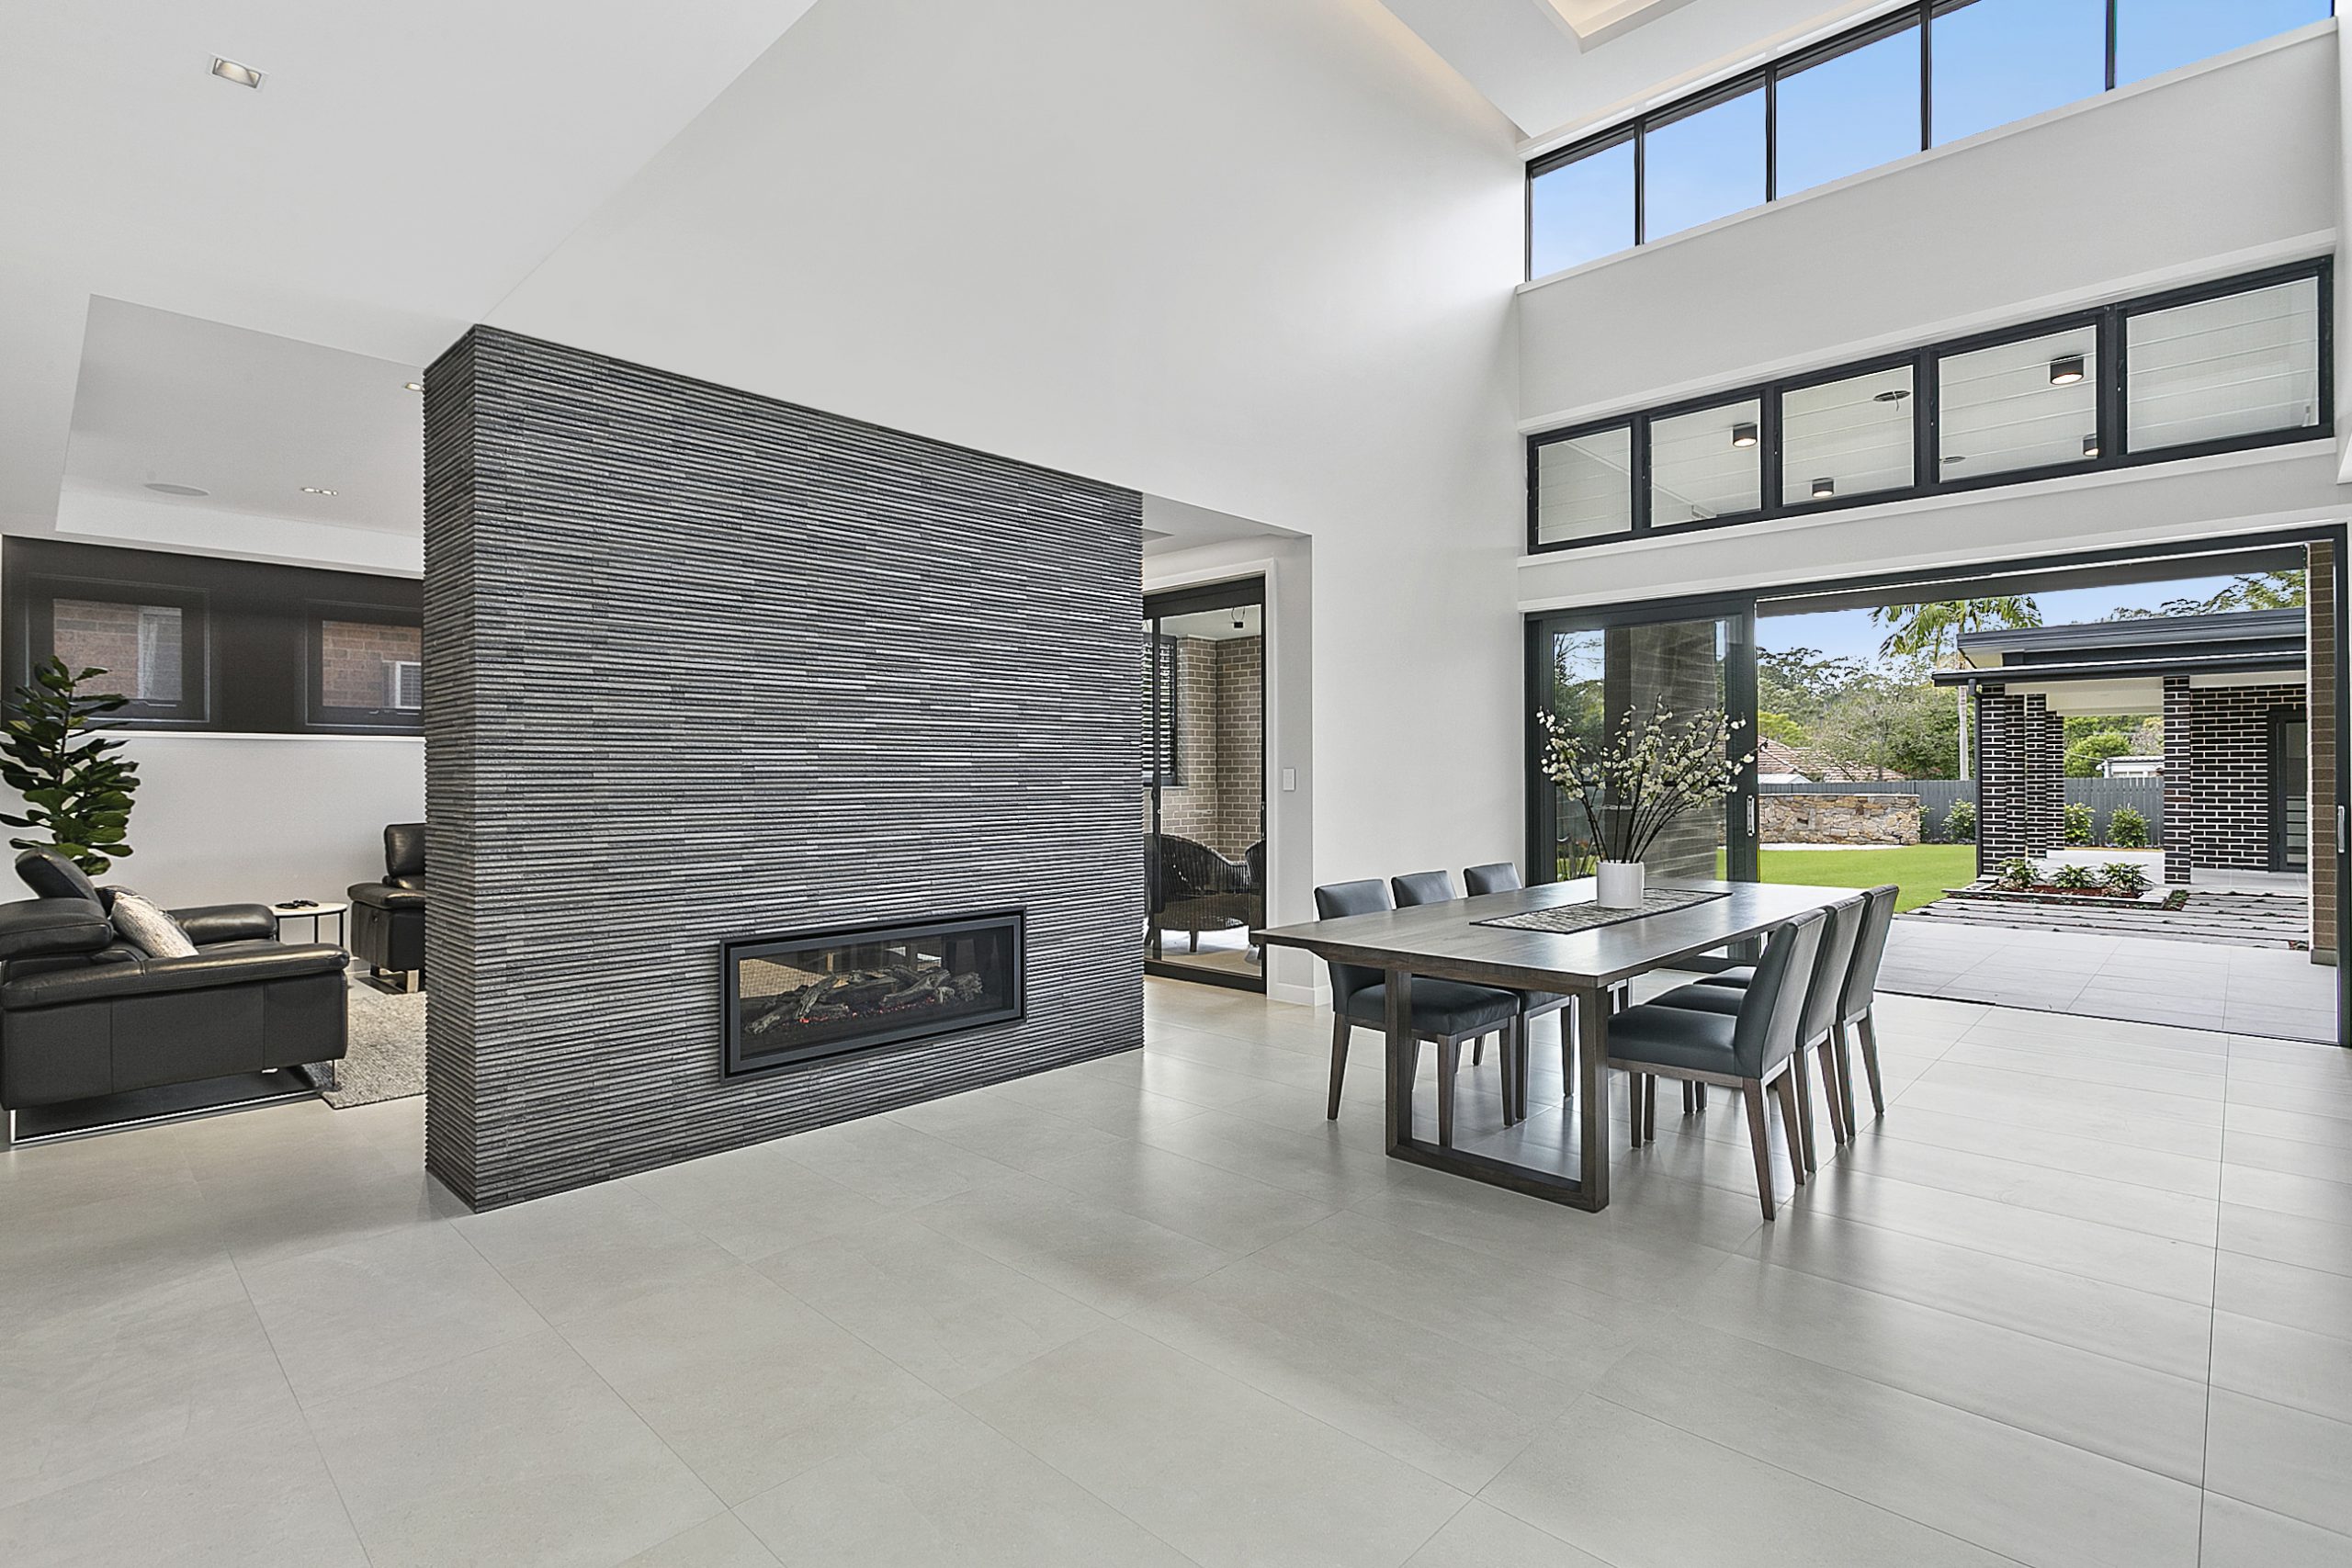 sleek dining room with outdoor access and stone fireplace